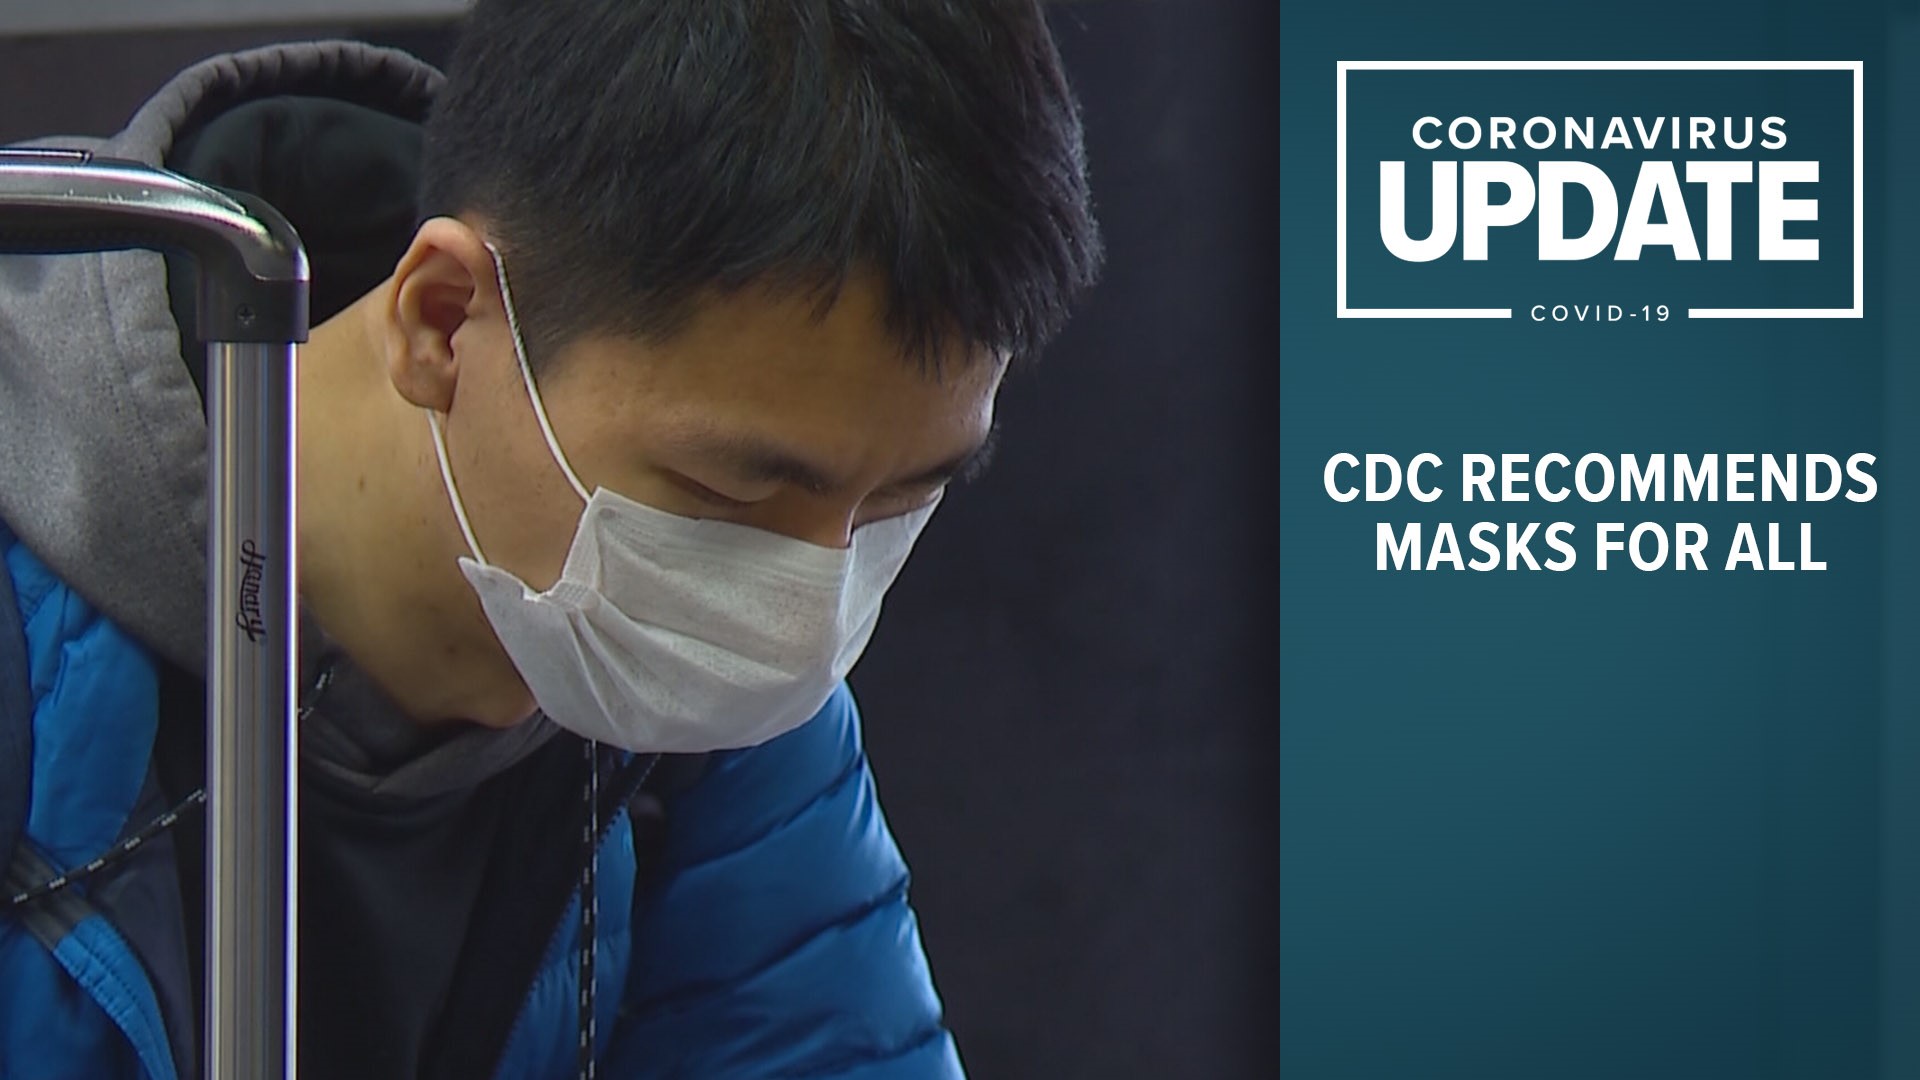 President Trump announced new CDC guidelines that recommend wearing non-medical masks to cover the face in public.